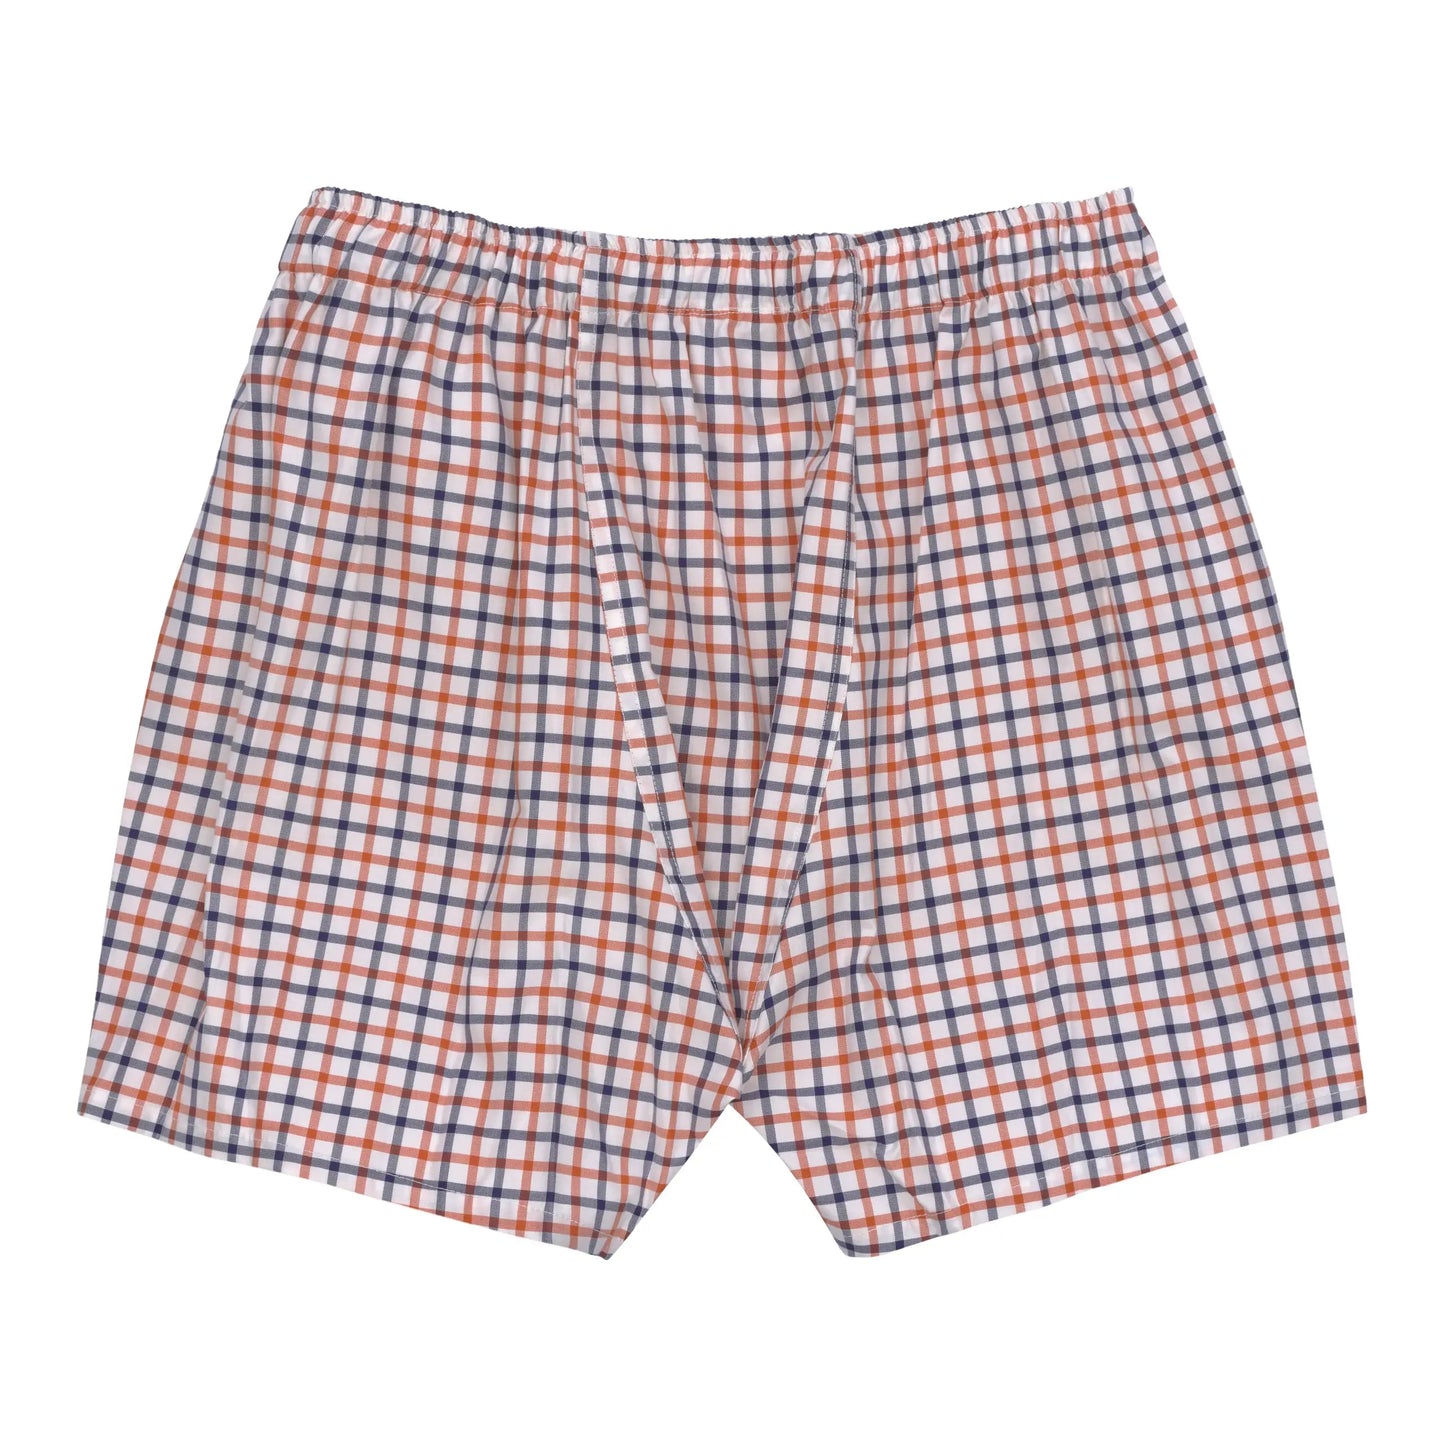 Emanuele Maffeis White Checked Boxer Shorts in Blue and Orange - SARTALE